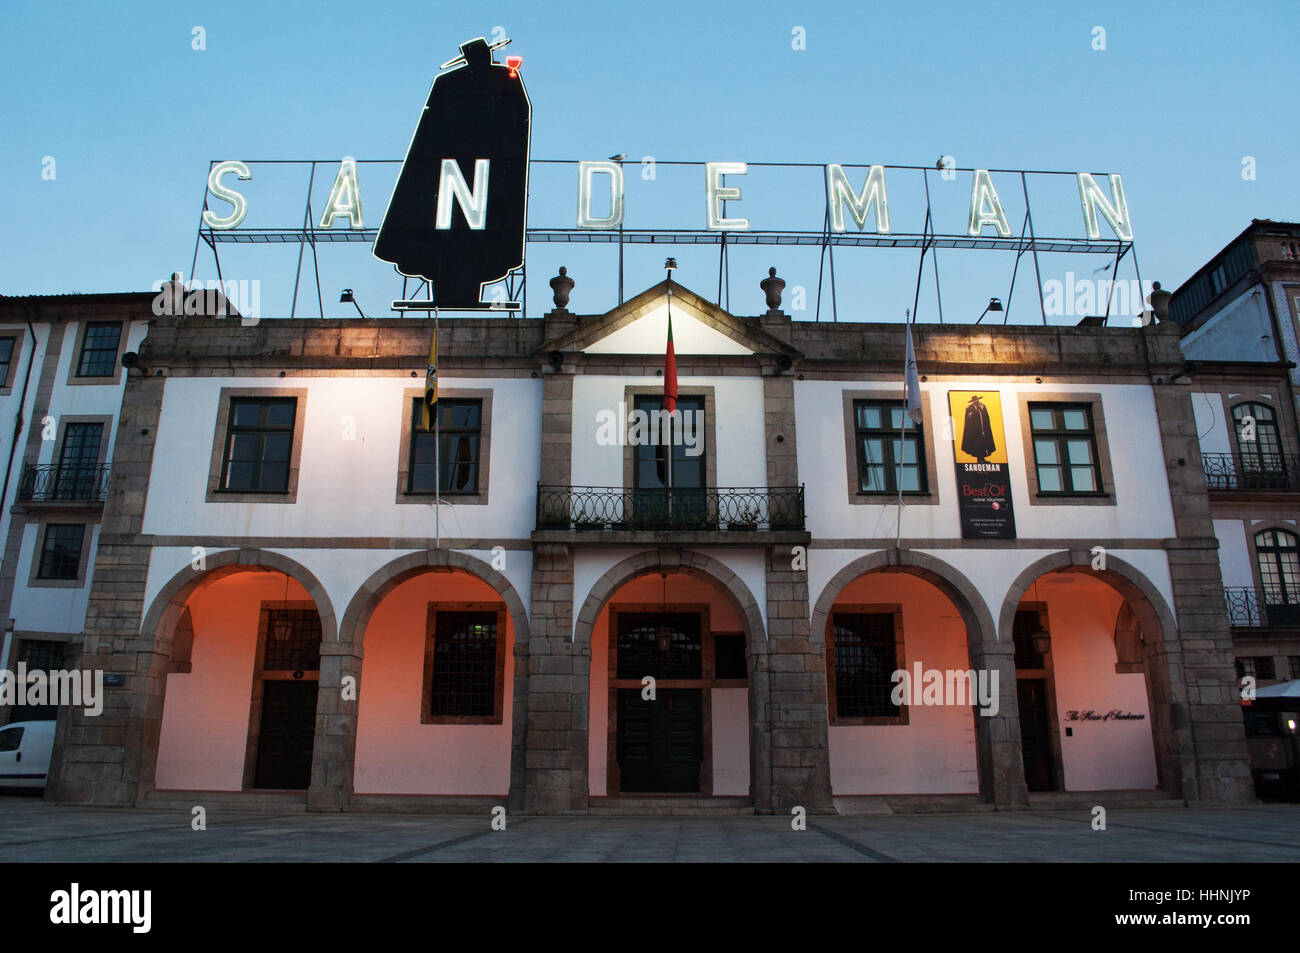 Vila Nova de Gaia: the iconic House of Sandeman, housing the Museum and cellars with Porto and Sherry wines Stock Photo